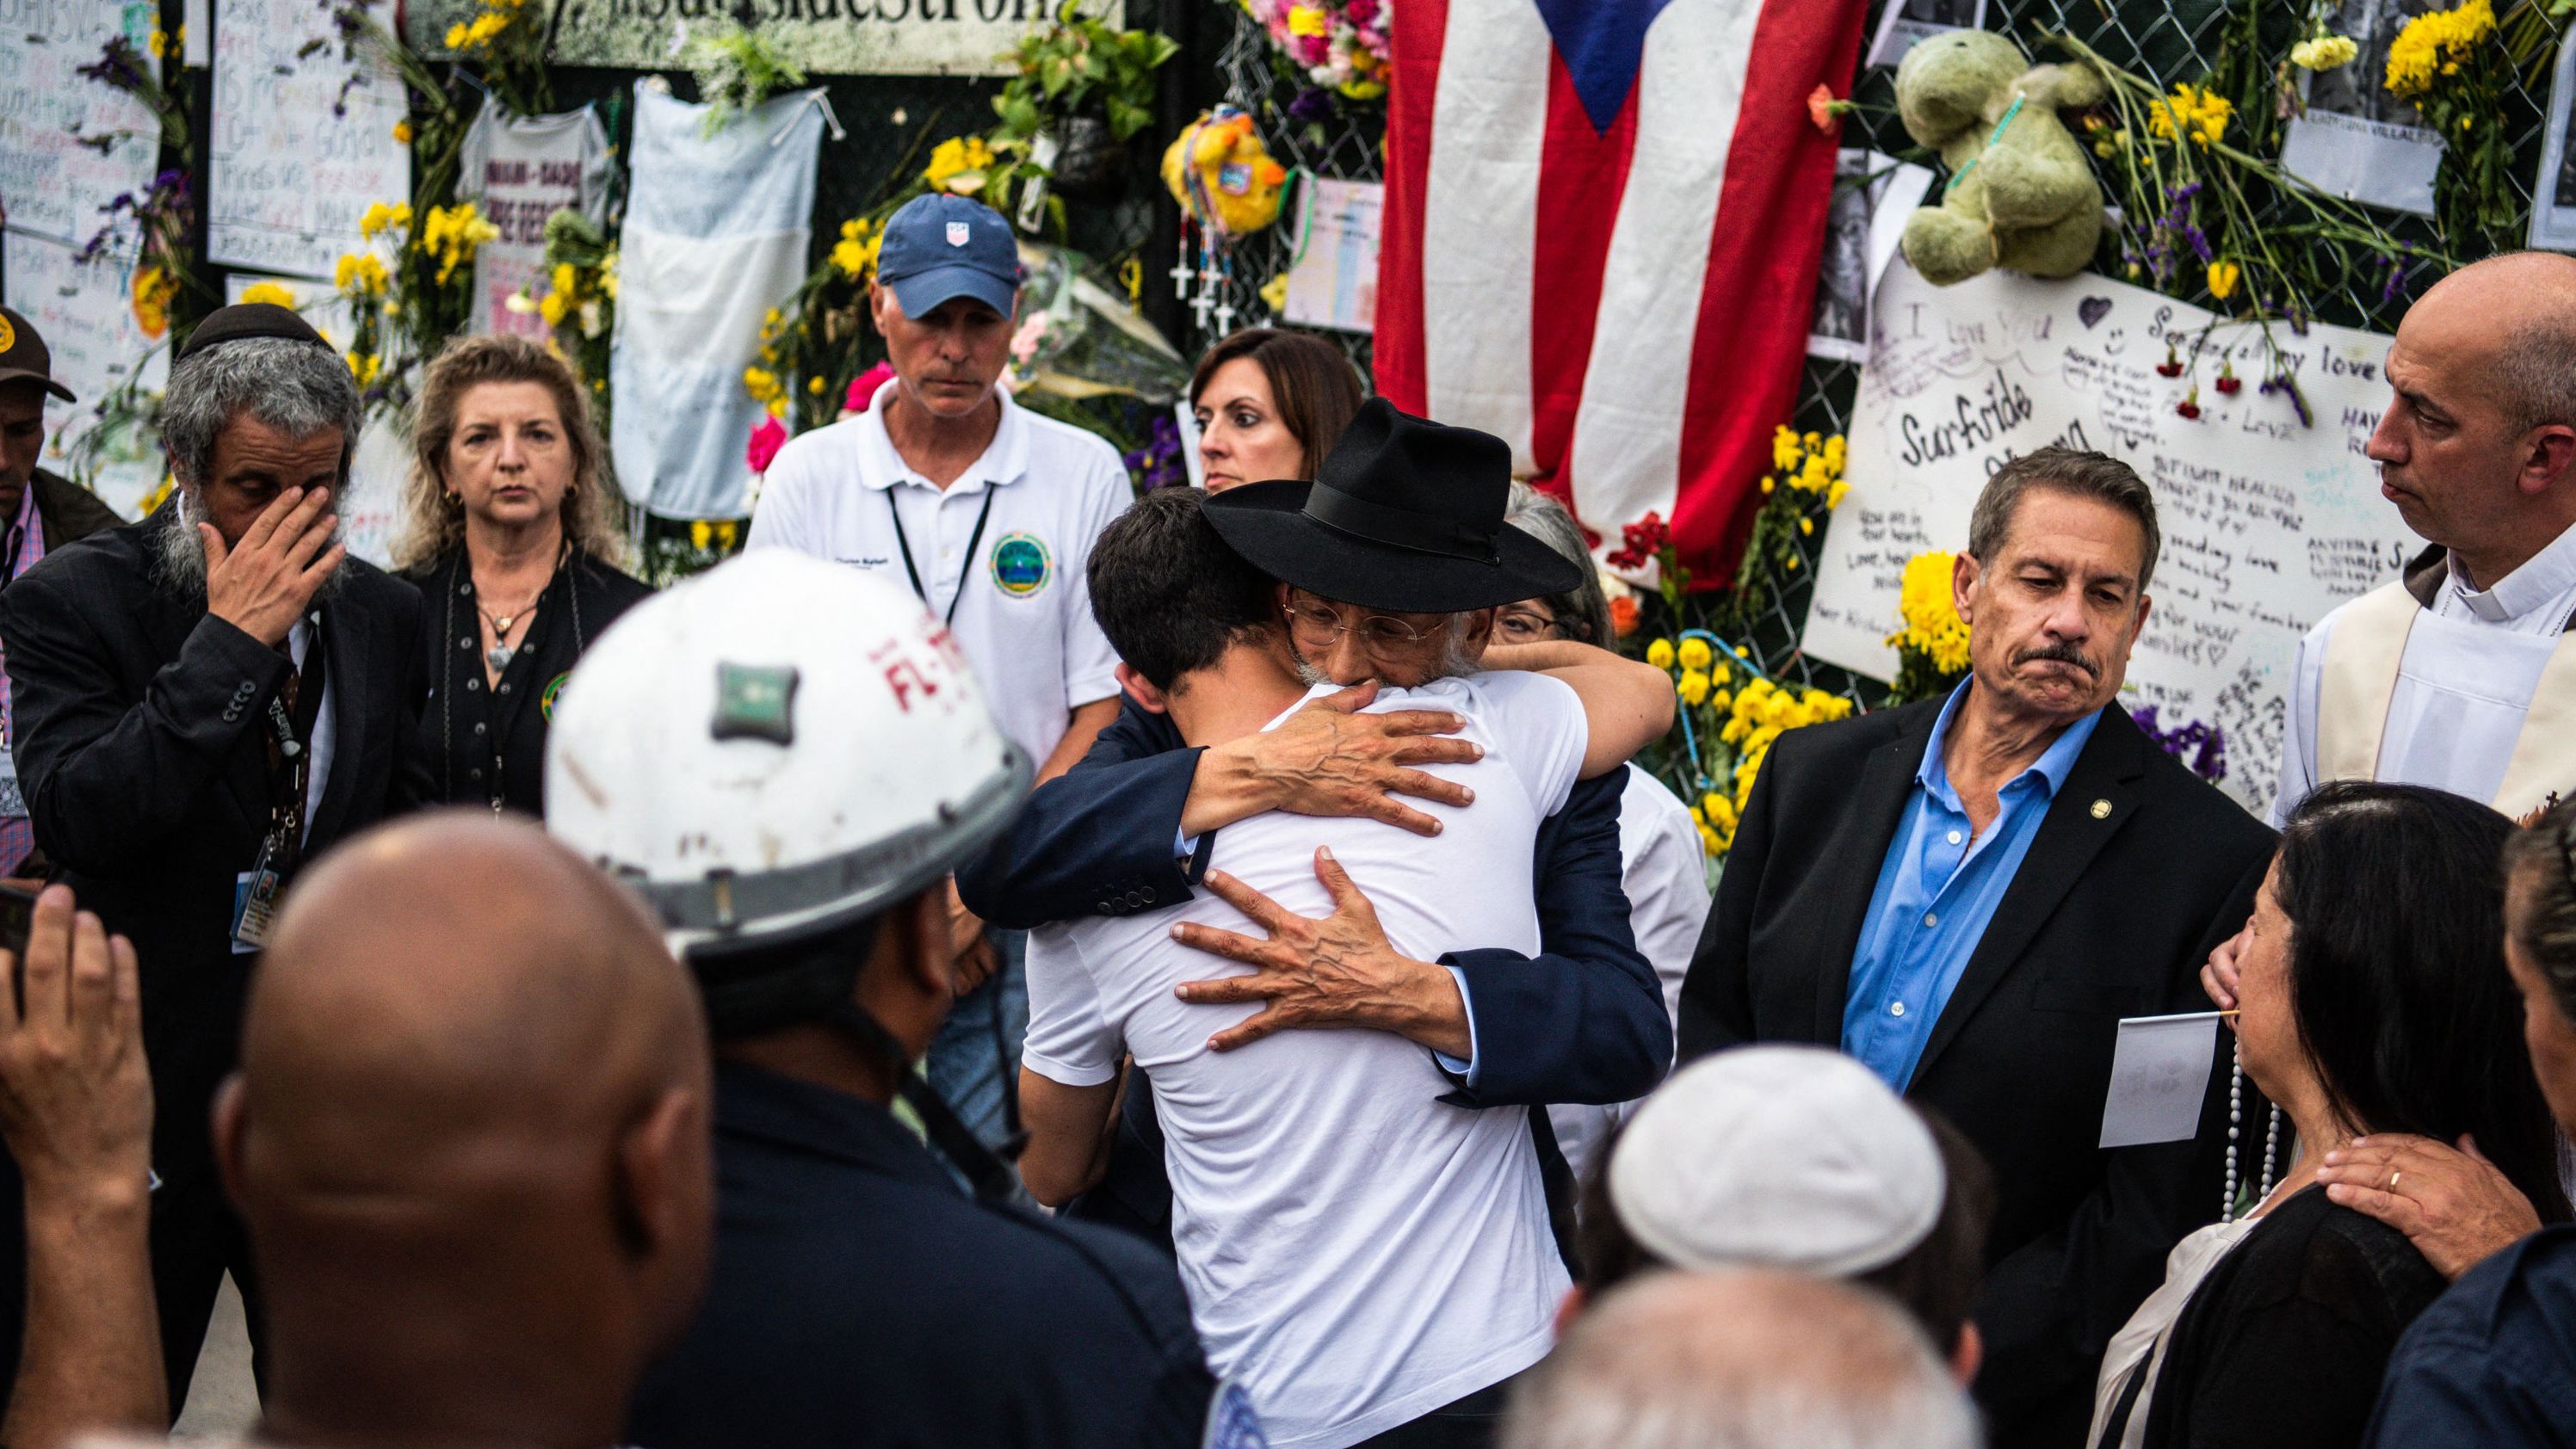 A member of Miami-Dade Fire Rescue hugs victims' family members and friends at the memorial near the collapsed building.